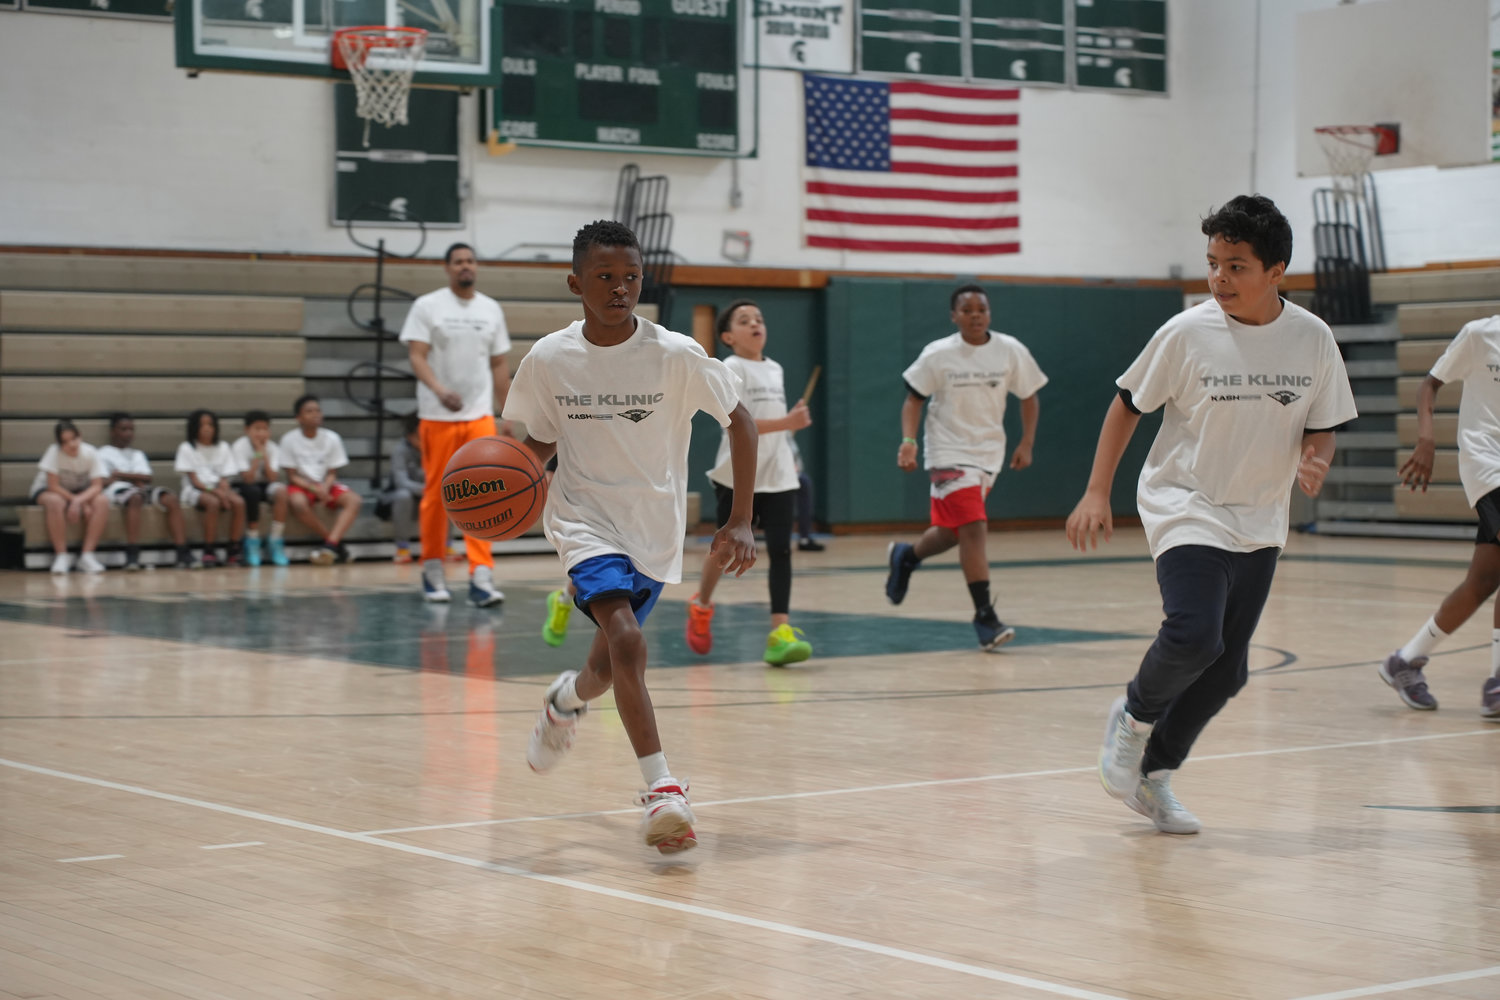 Jacob Reid, 12, of Elmont heads down the court during a Klinic Kids basketball game.